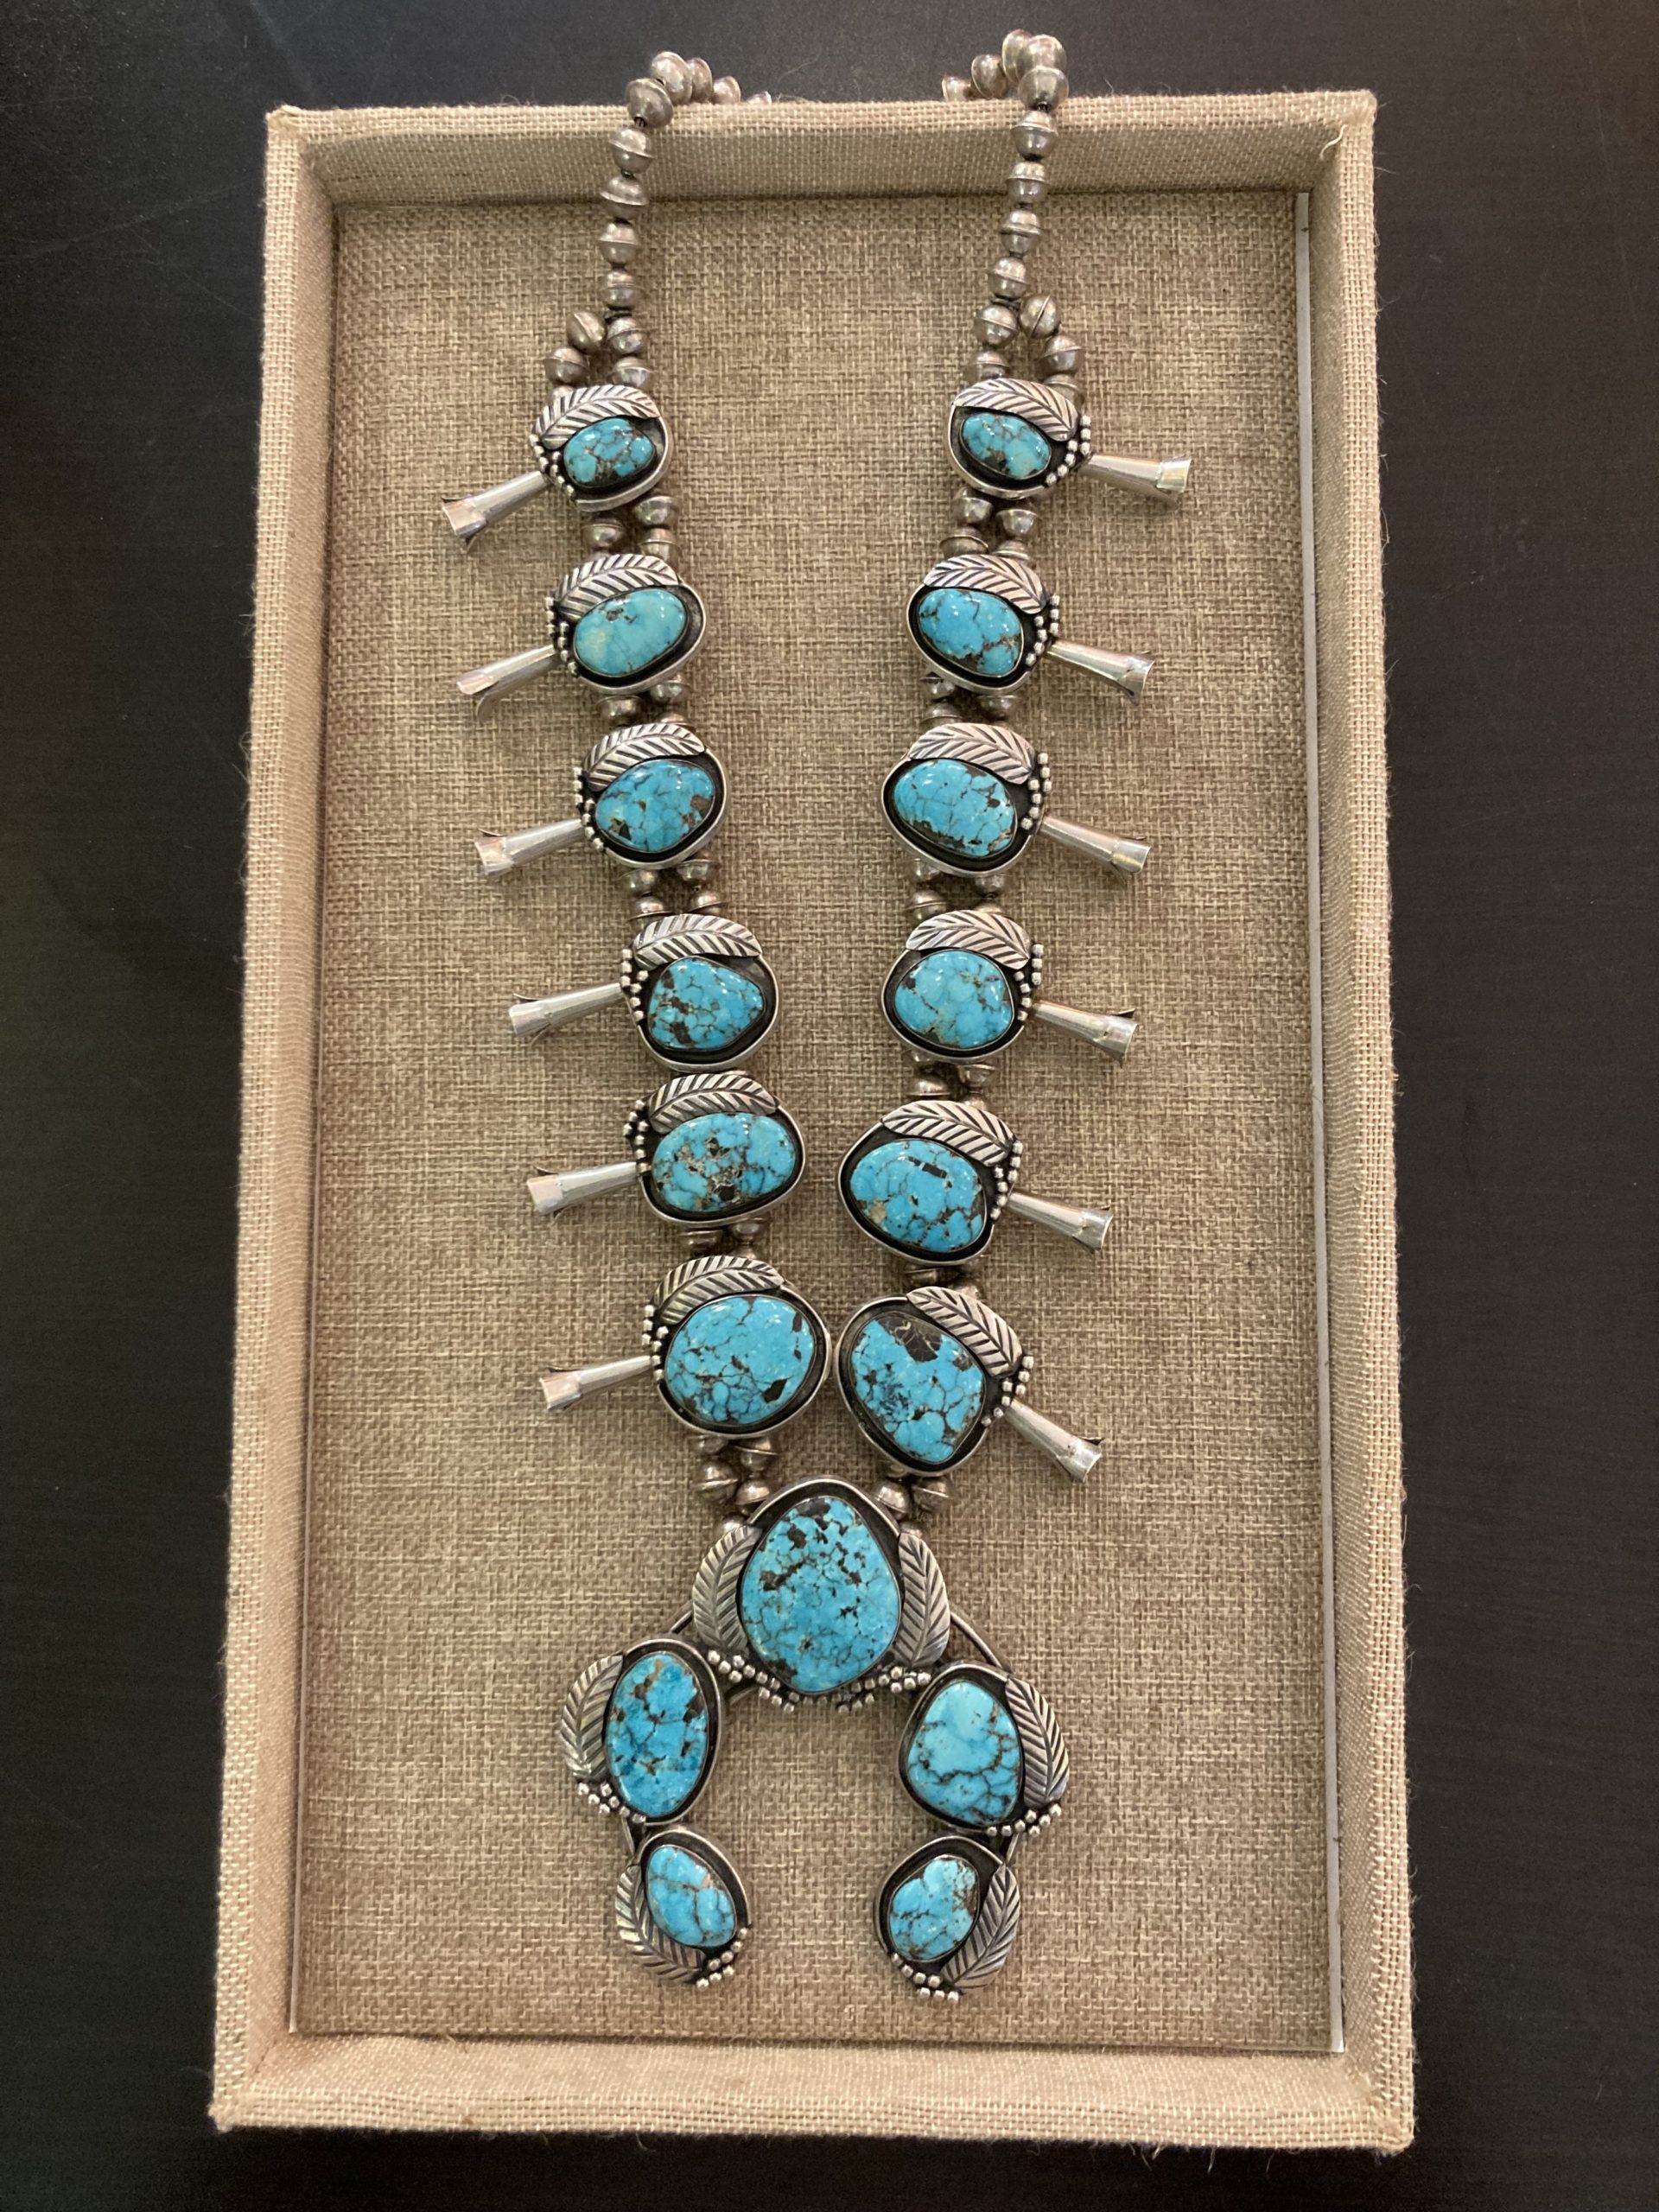 Stormy Mountain Turquoise Squash Blossom Necklace